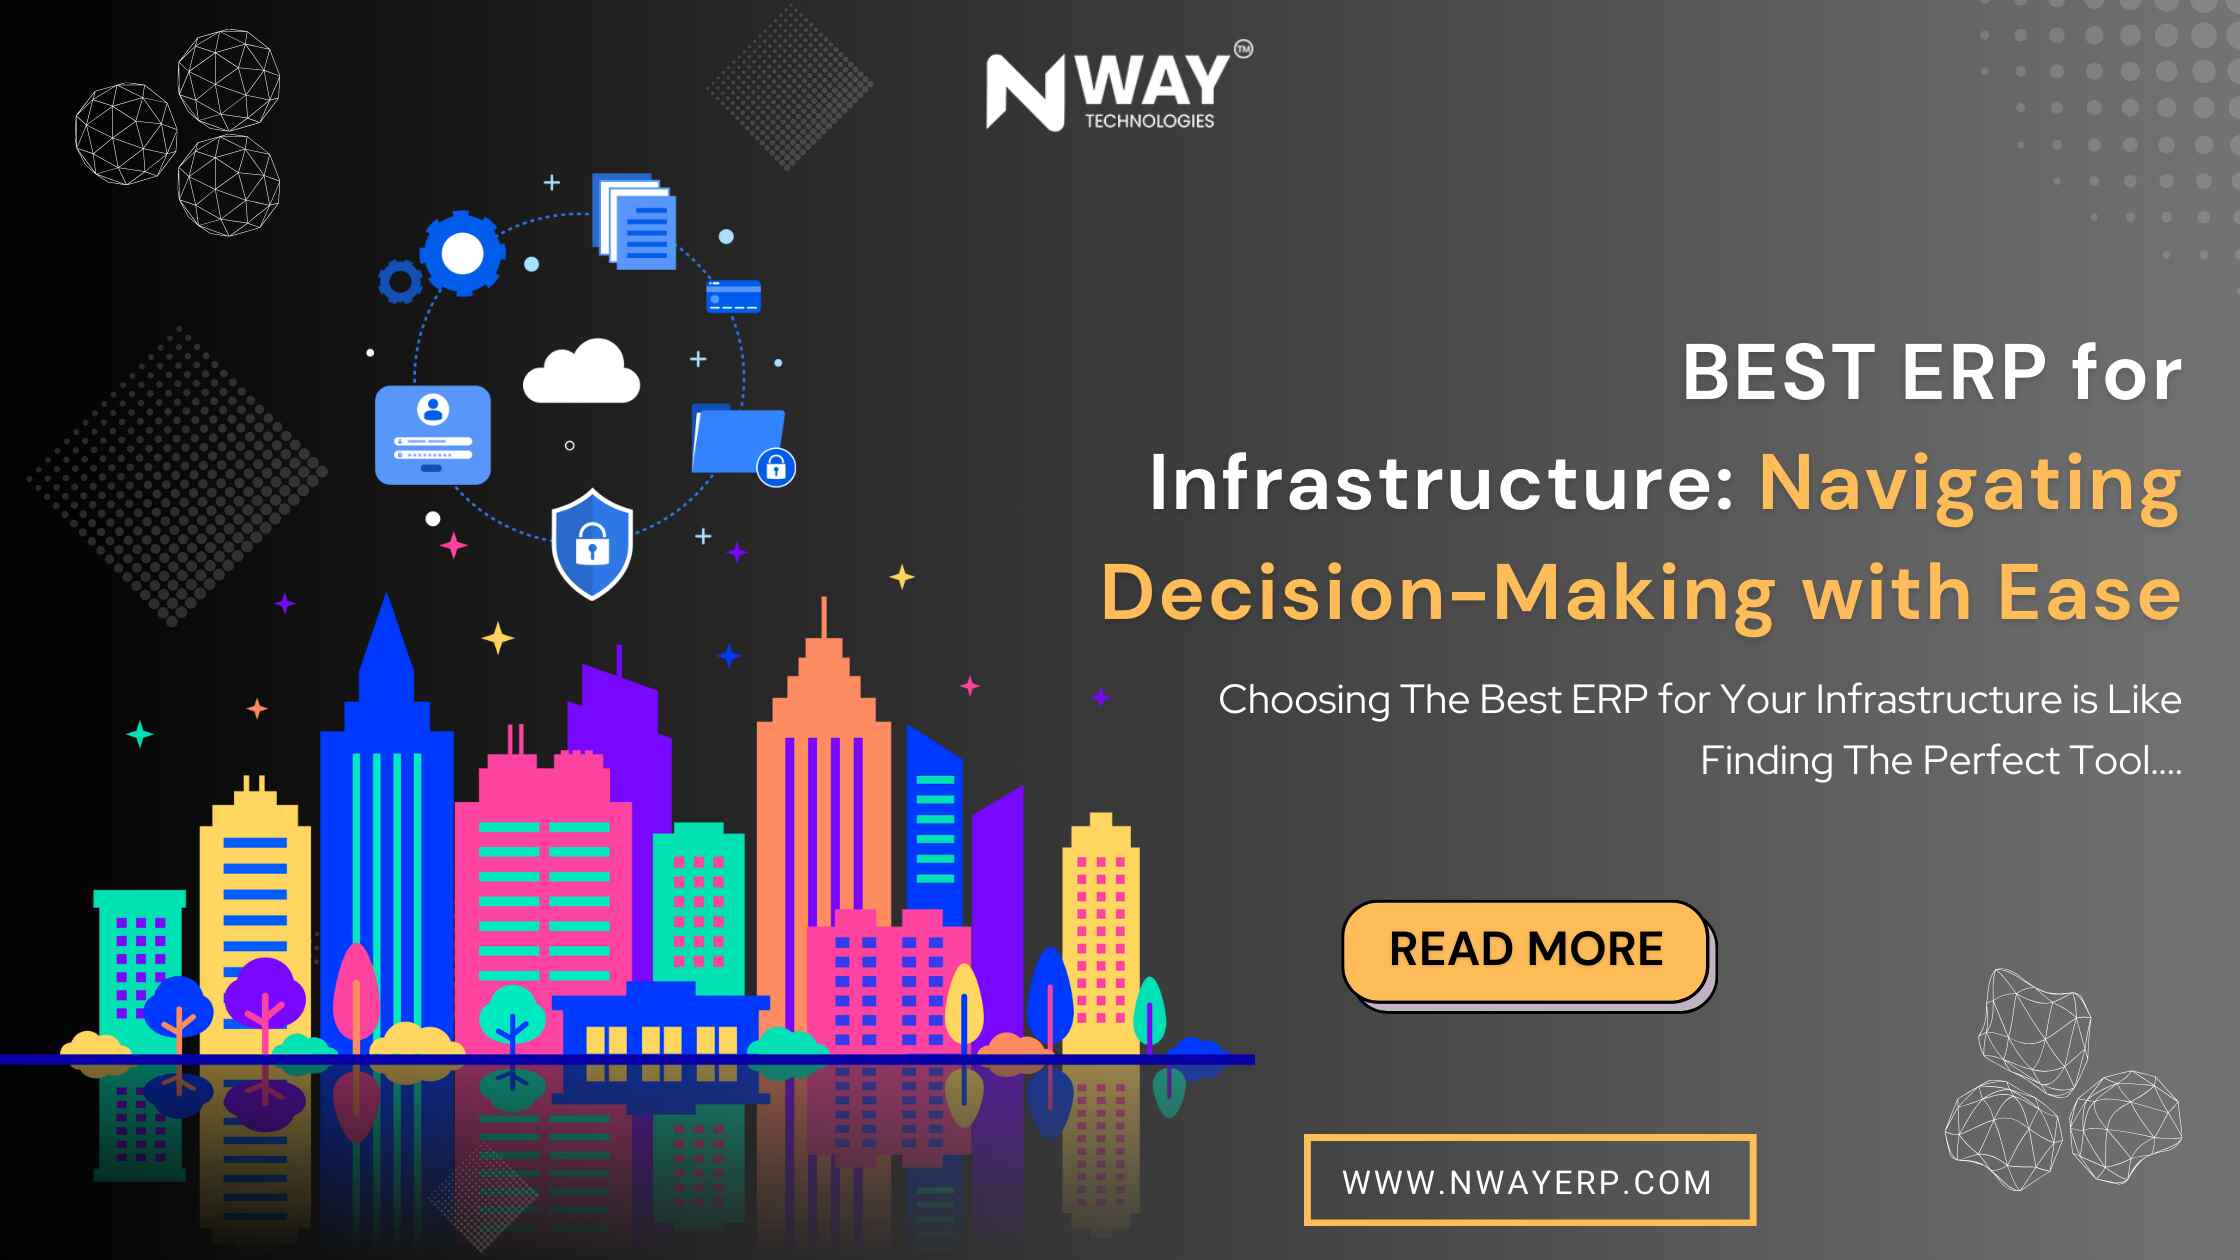 BEST ERP for Infrastructure: Navigating Decision-Making with Ease